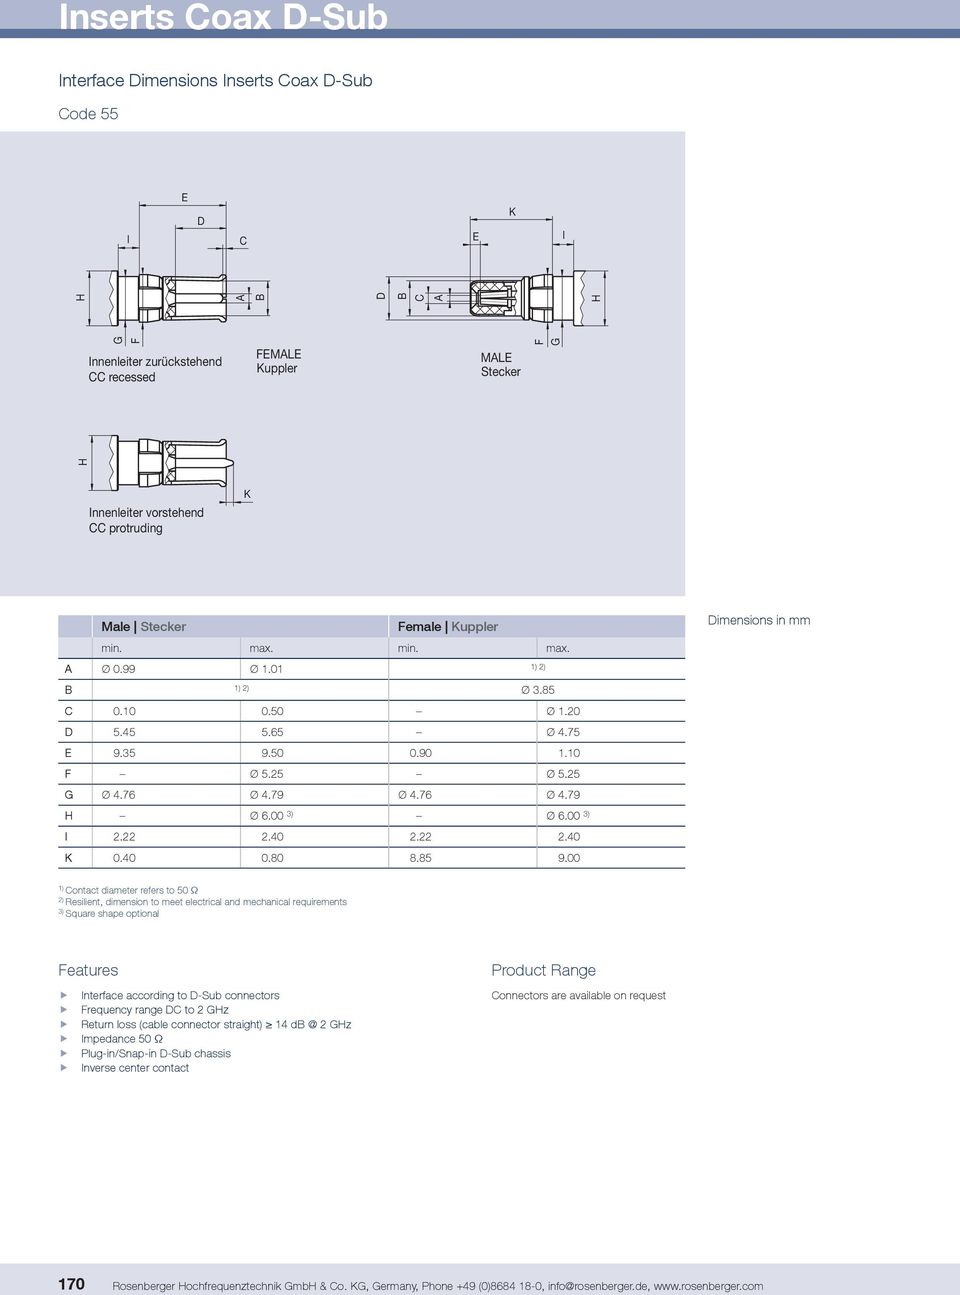 00 imensions in mm 1) ontact diameter refers to 50 Ω 2) Resilient, dimension to meet electrical and mechanical requirements 3) Square shape optional eatures nterface according to -Sub connectors